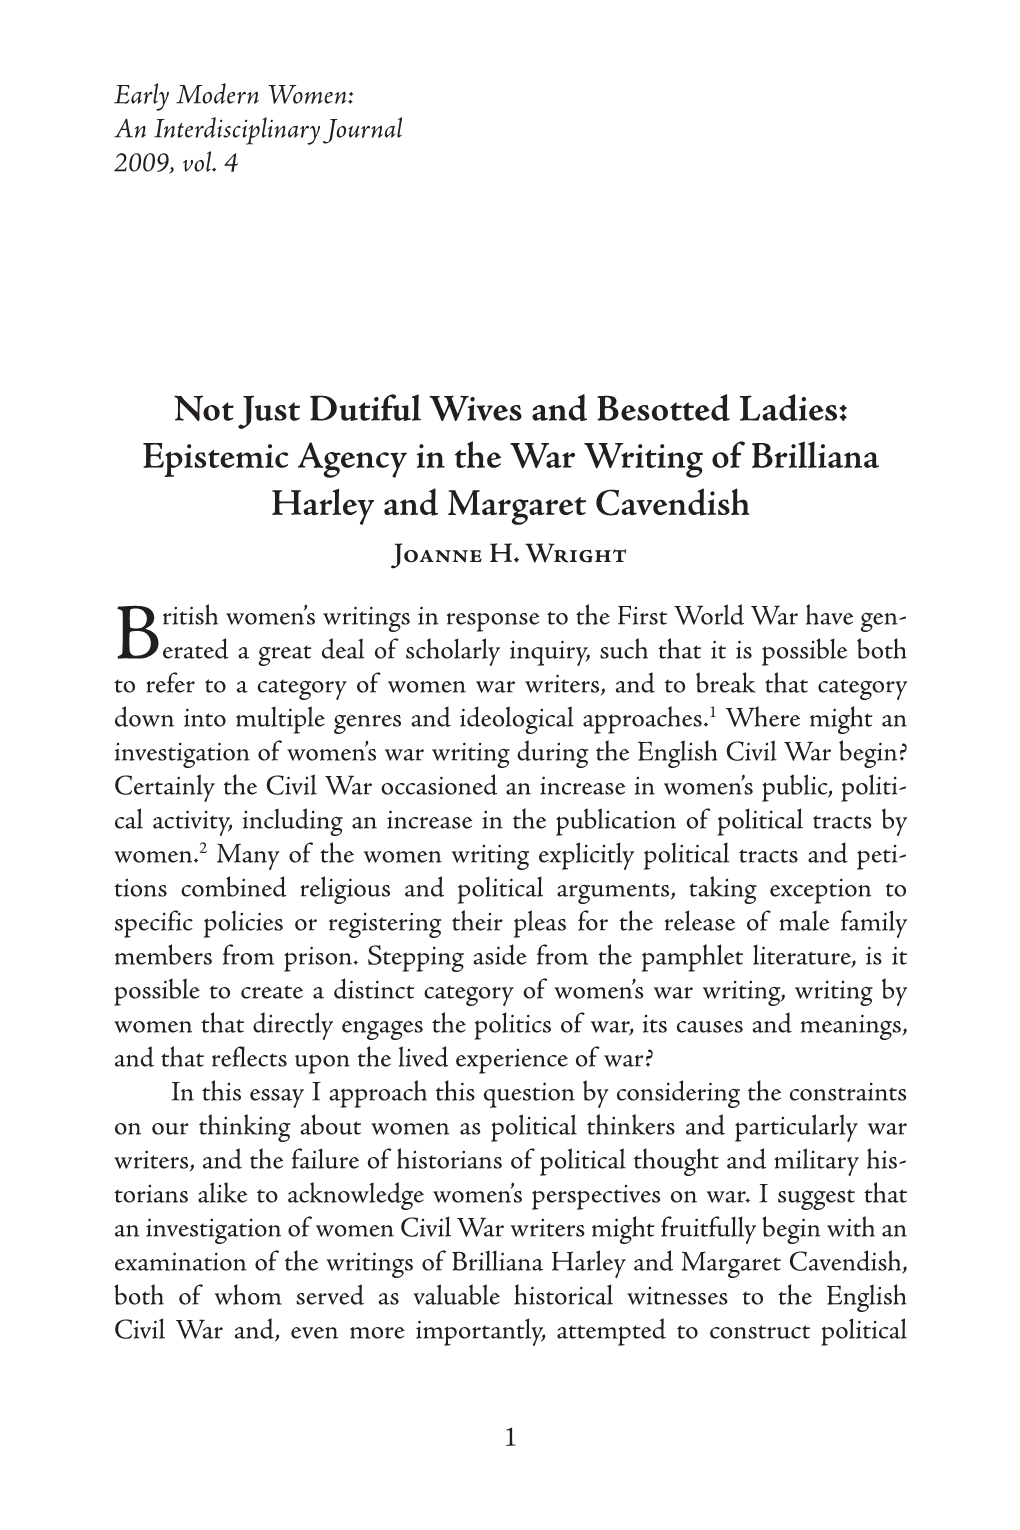 Not Just Dutiful Wives and Besotted Ladies: Epistemic Agency in the War Writing of Brilliana Harley and Margaret Cavendish Joanne H